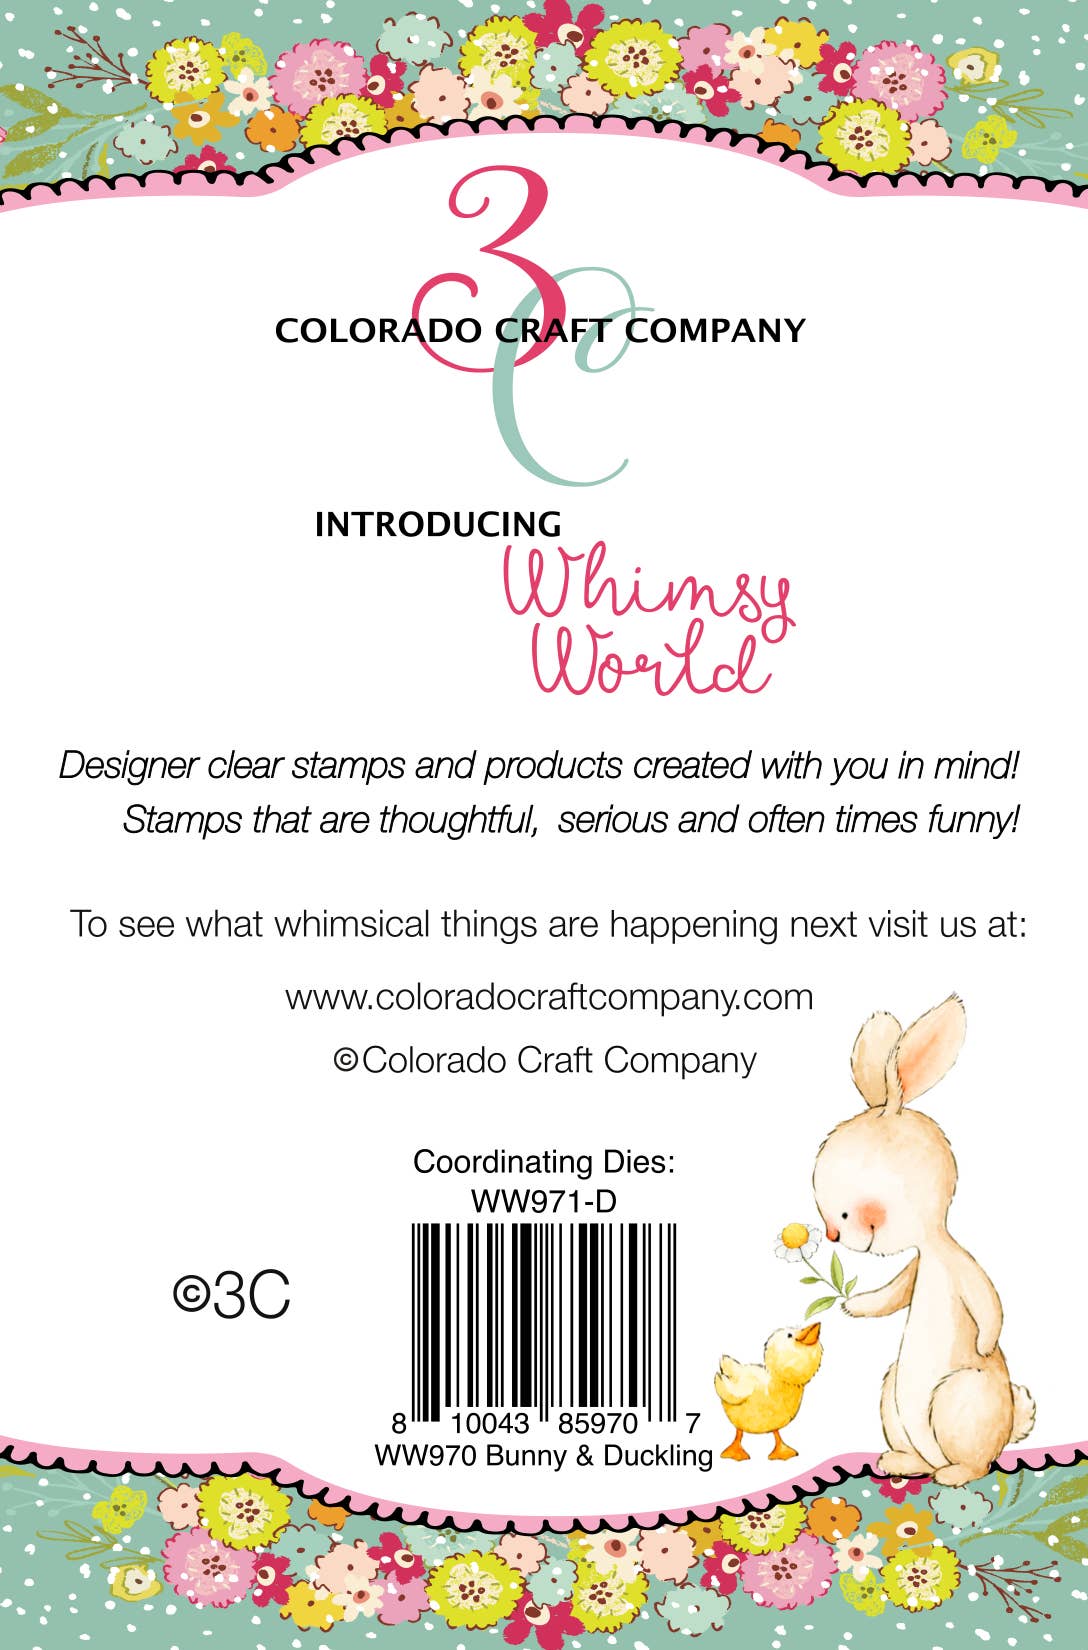 Colorado Craft Company - WW970 Whimsy World~Bunny & Duckling 3 x 4 Clear Stamps